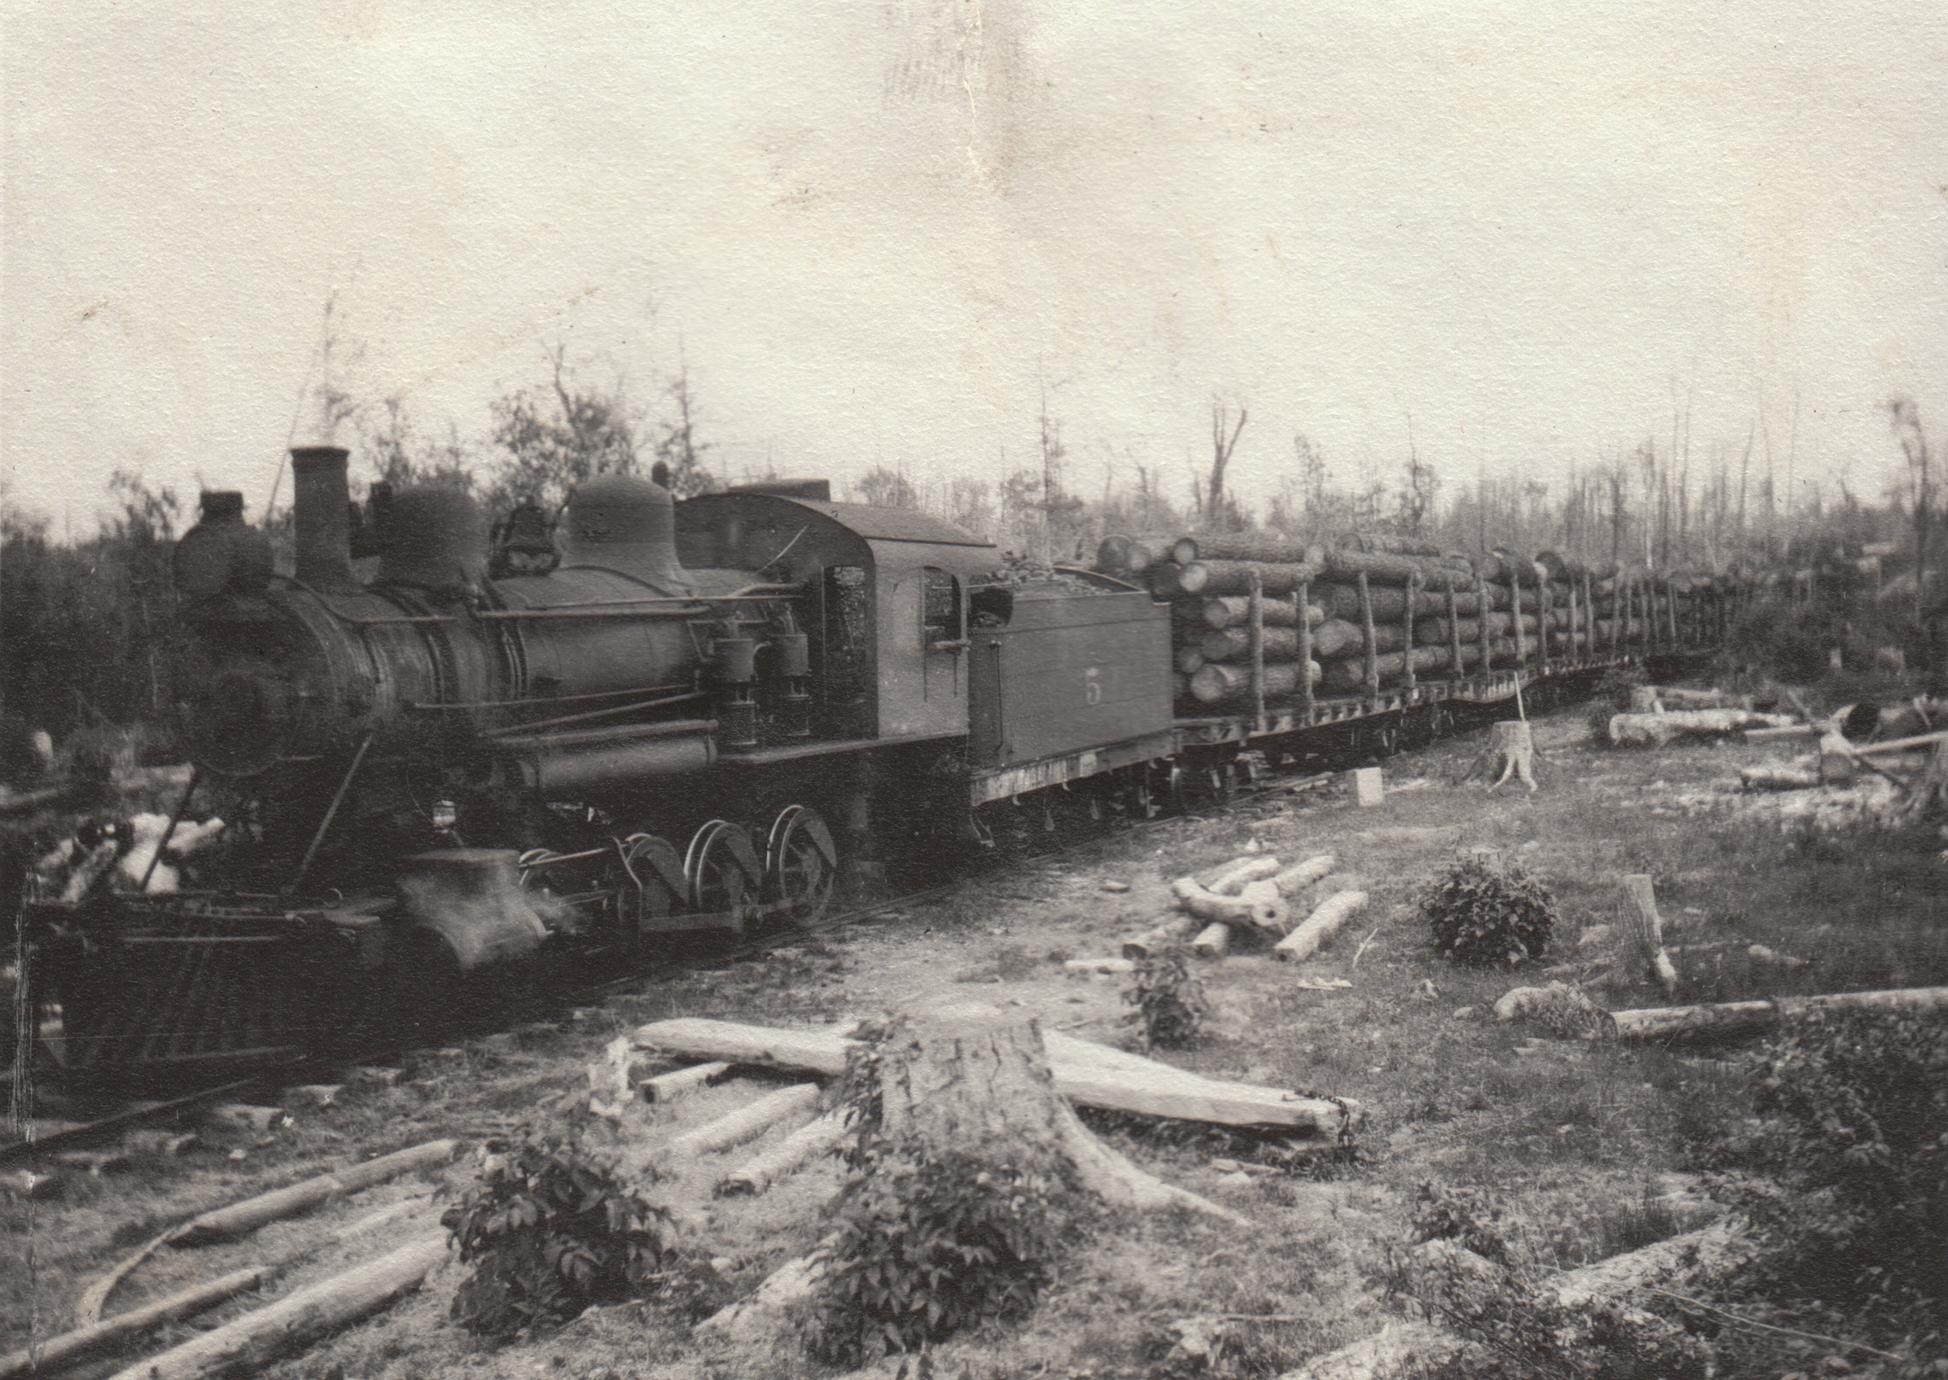 Train loaded with logs